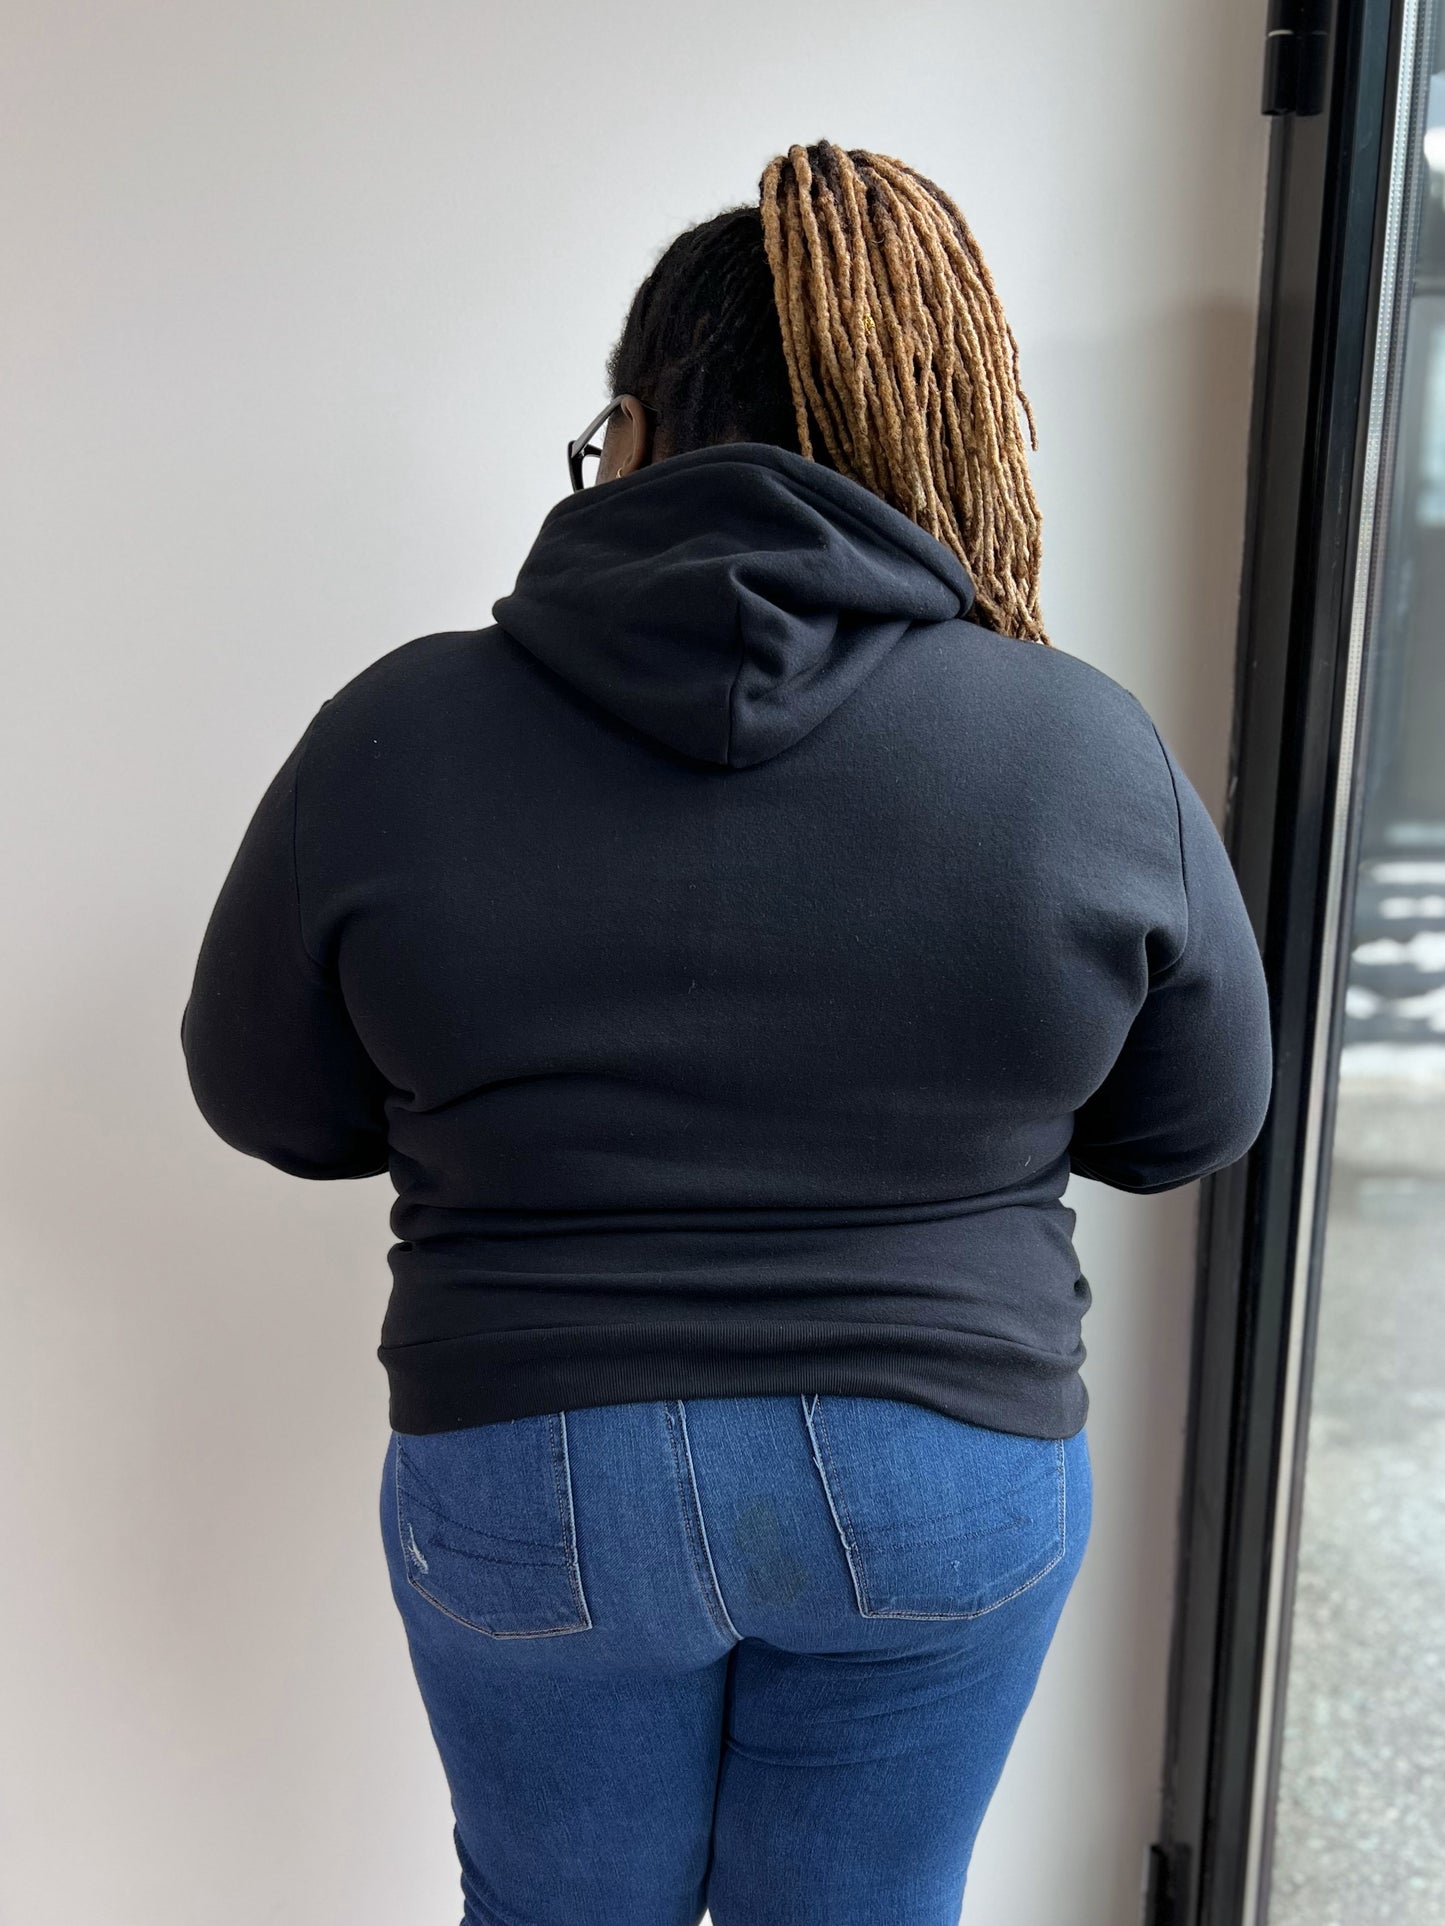 Back view of a woman wearing a black hoodie.